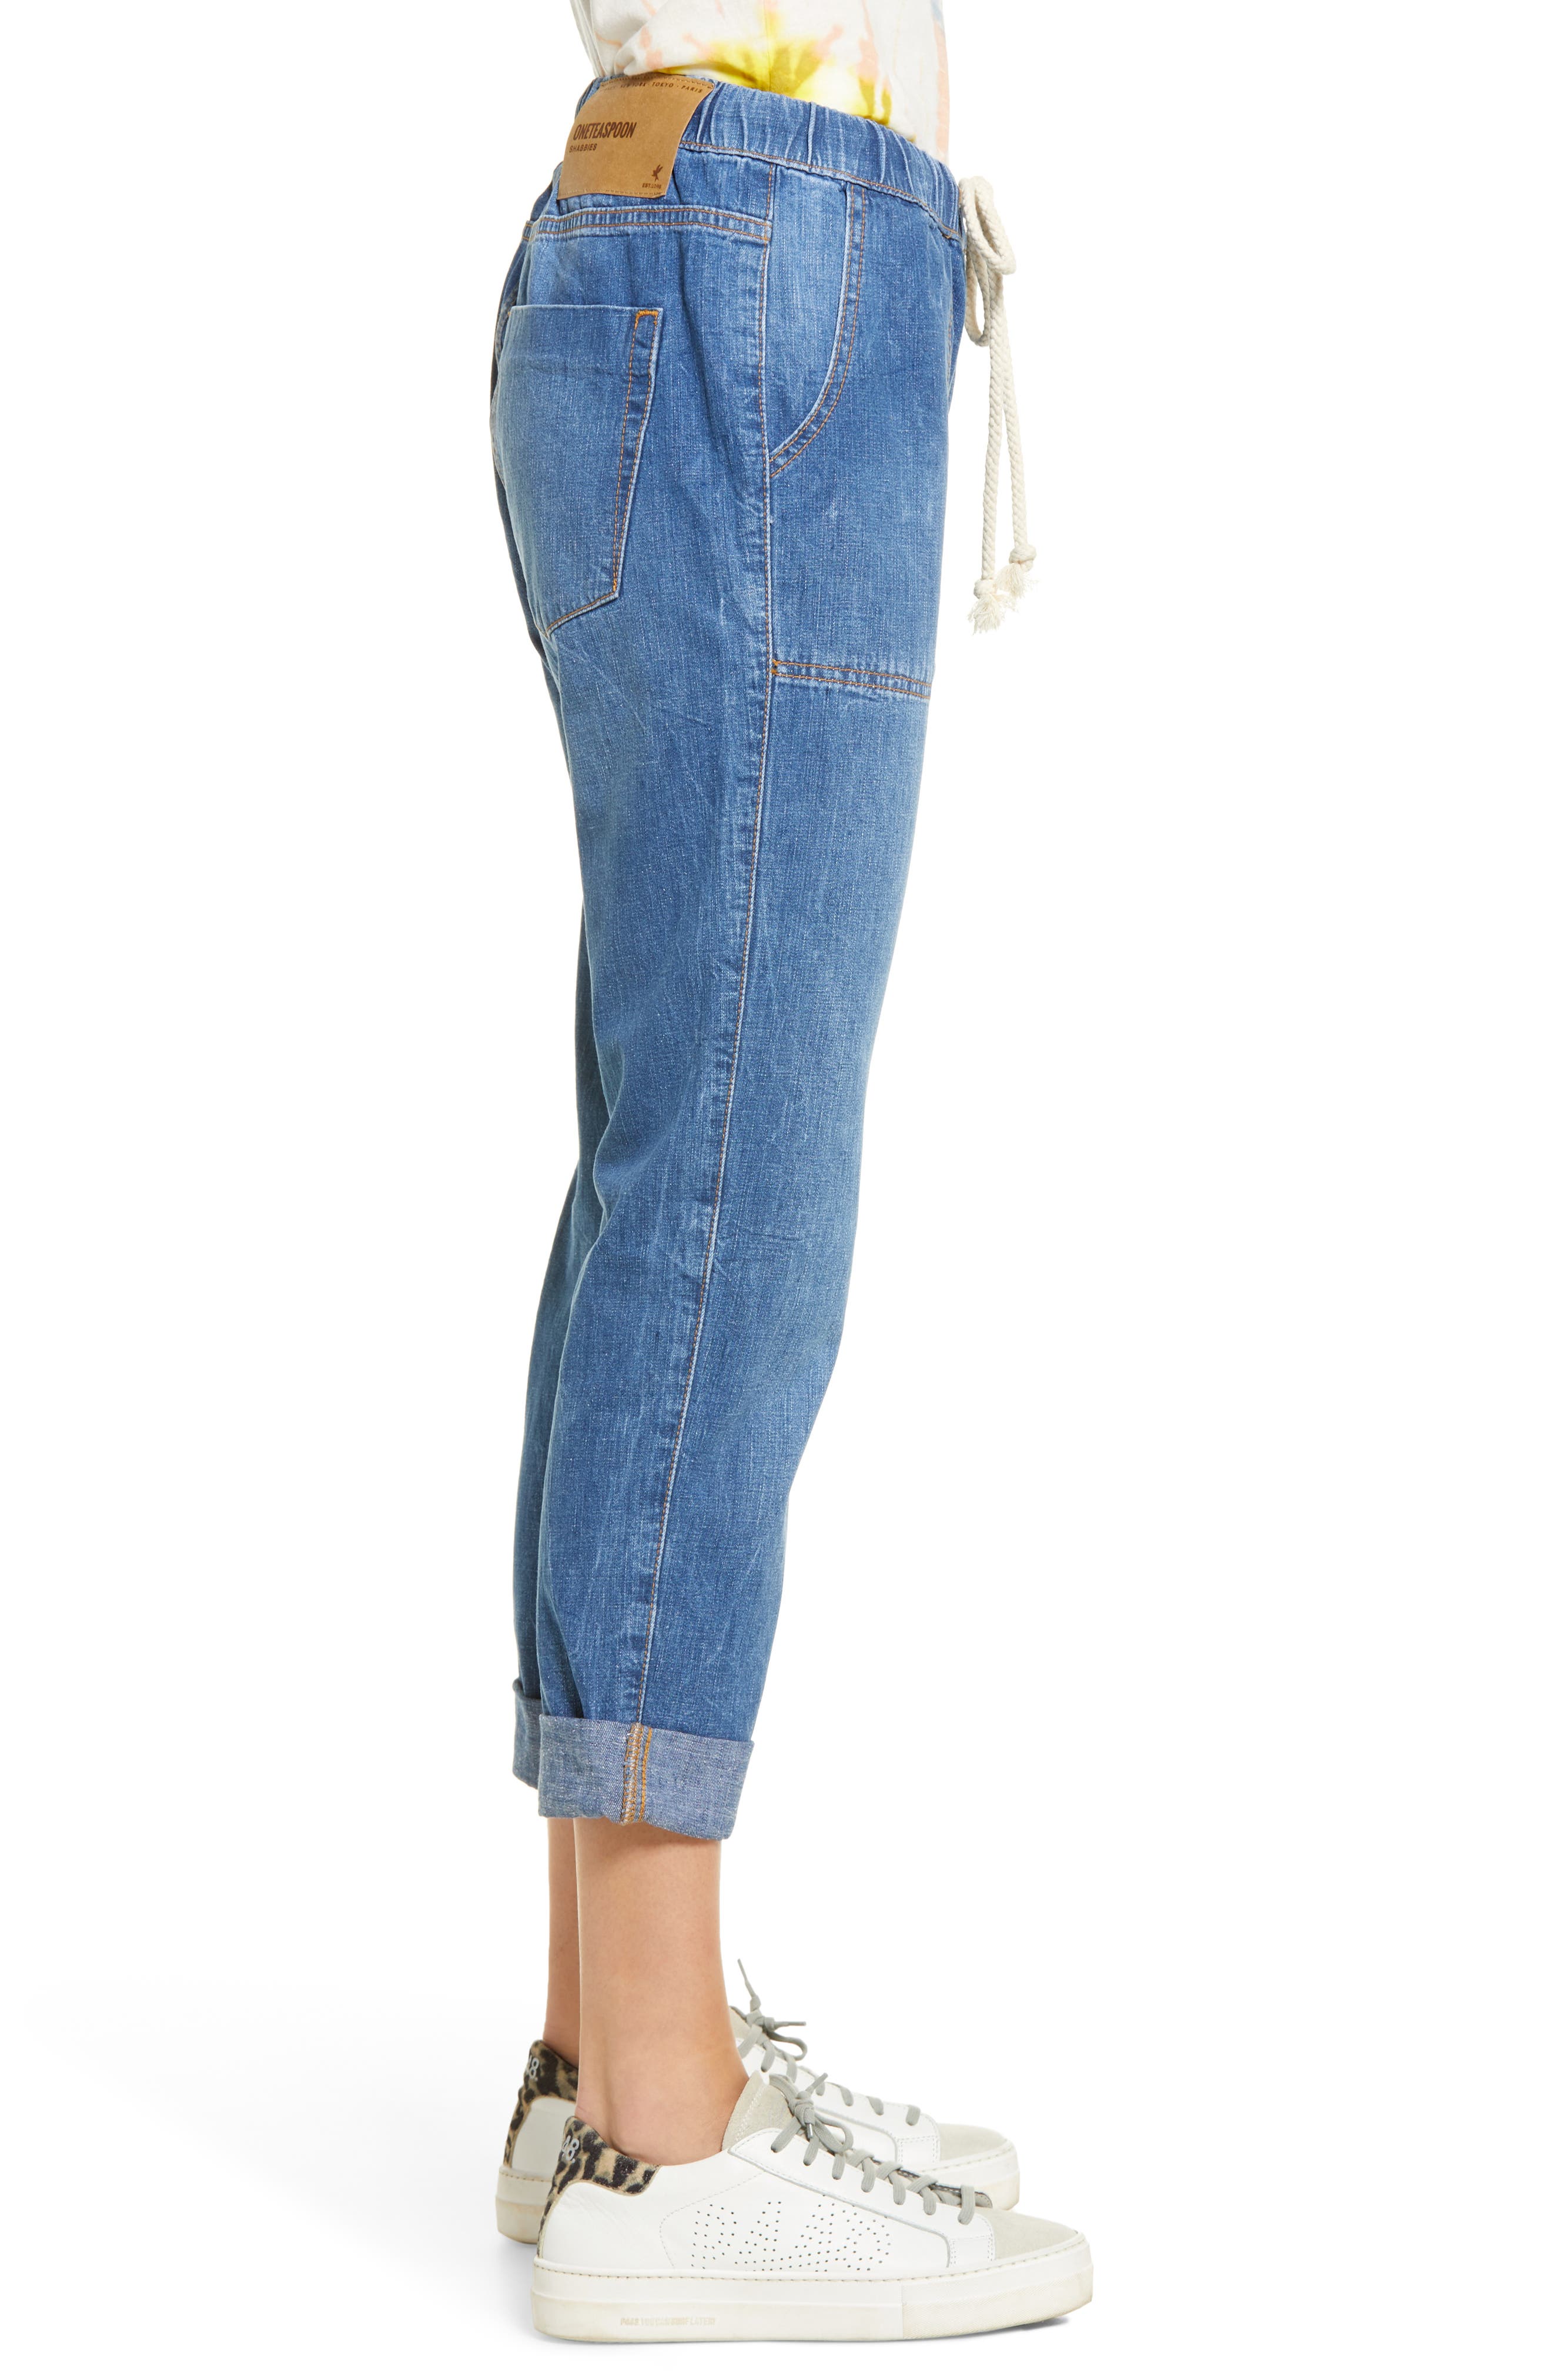 Shabbies Drawstring Tapered Jeans in Resort Blue at Nordstrom Nordstrom Women Clothing Jeans Tapered Jeans 